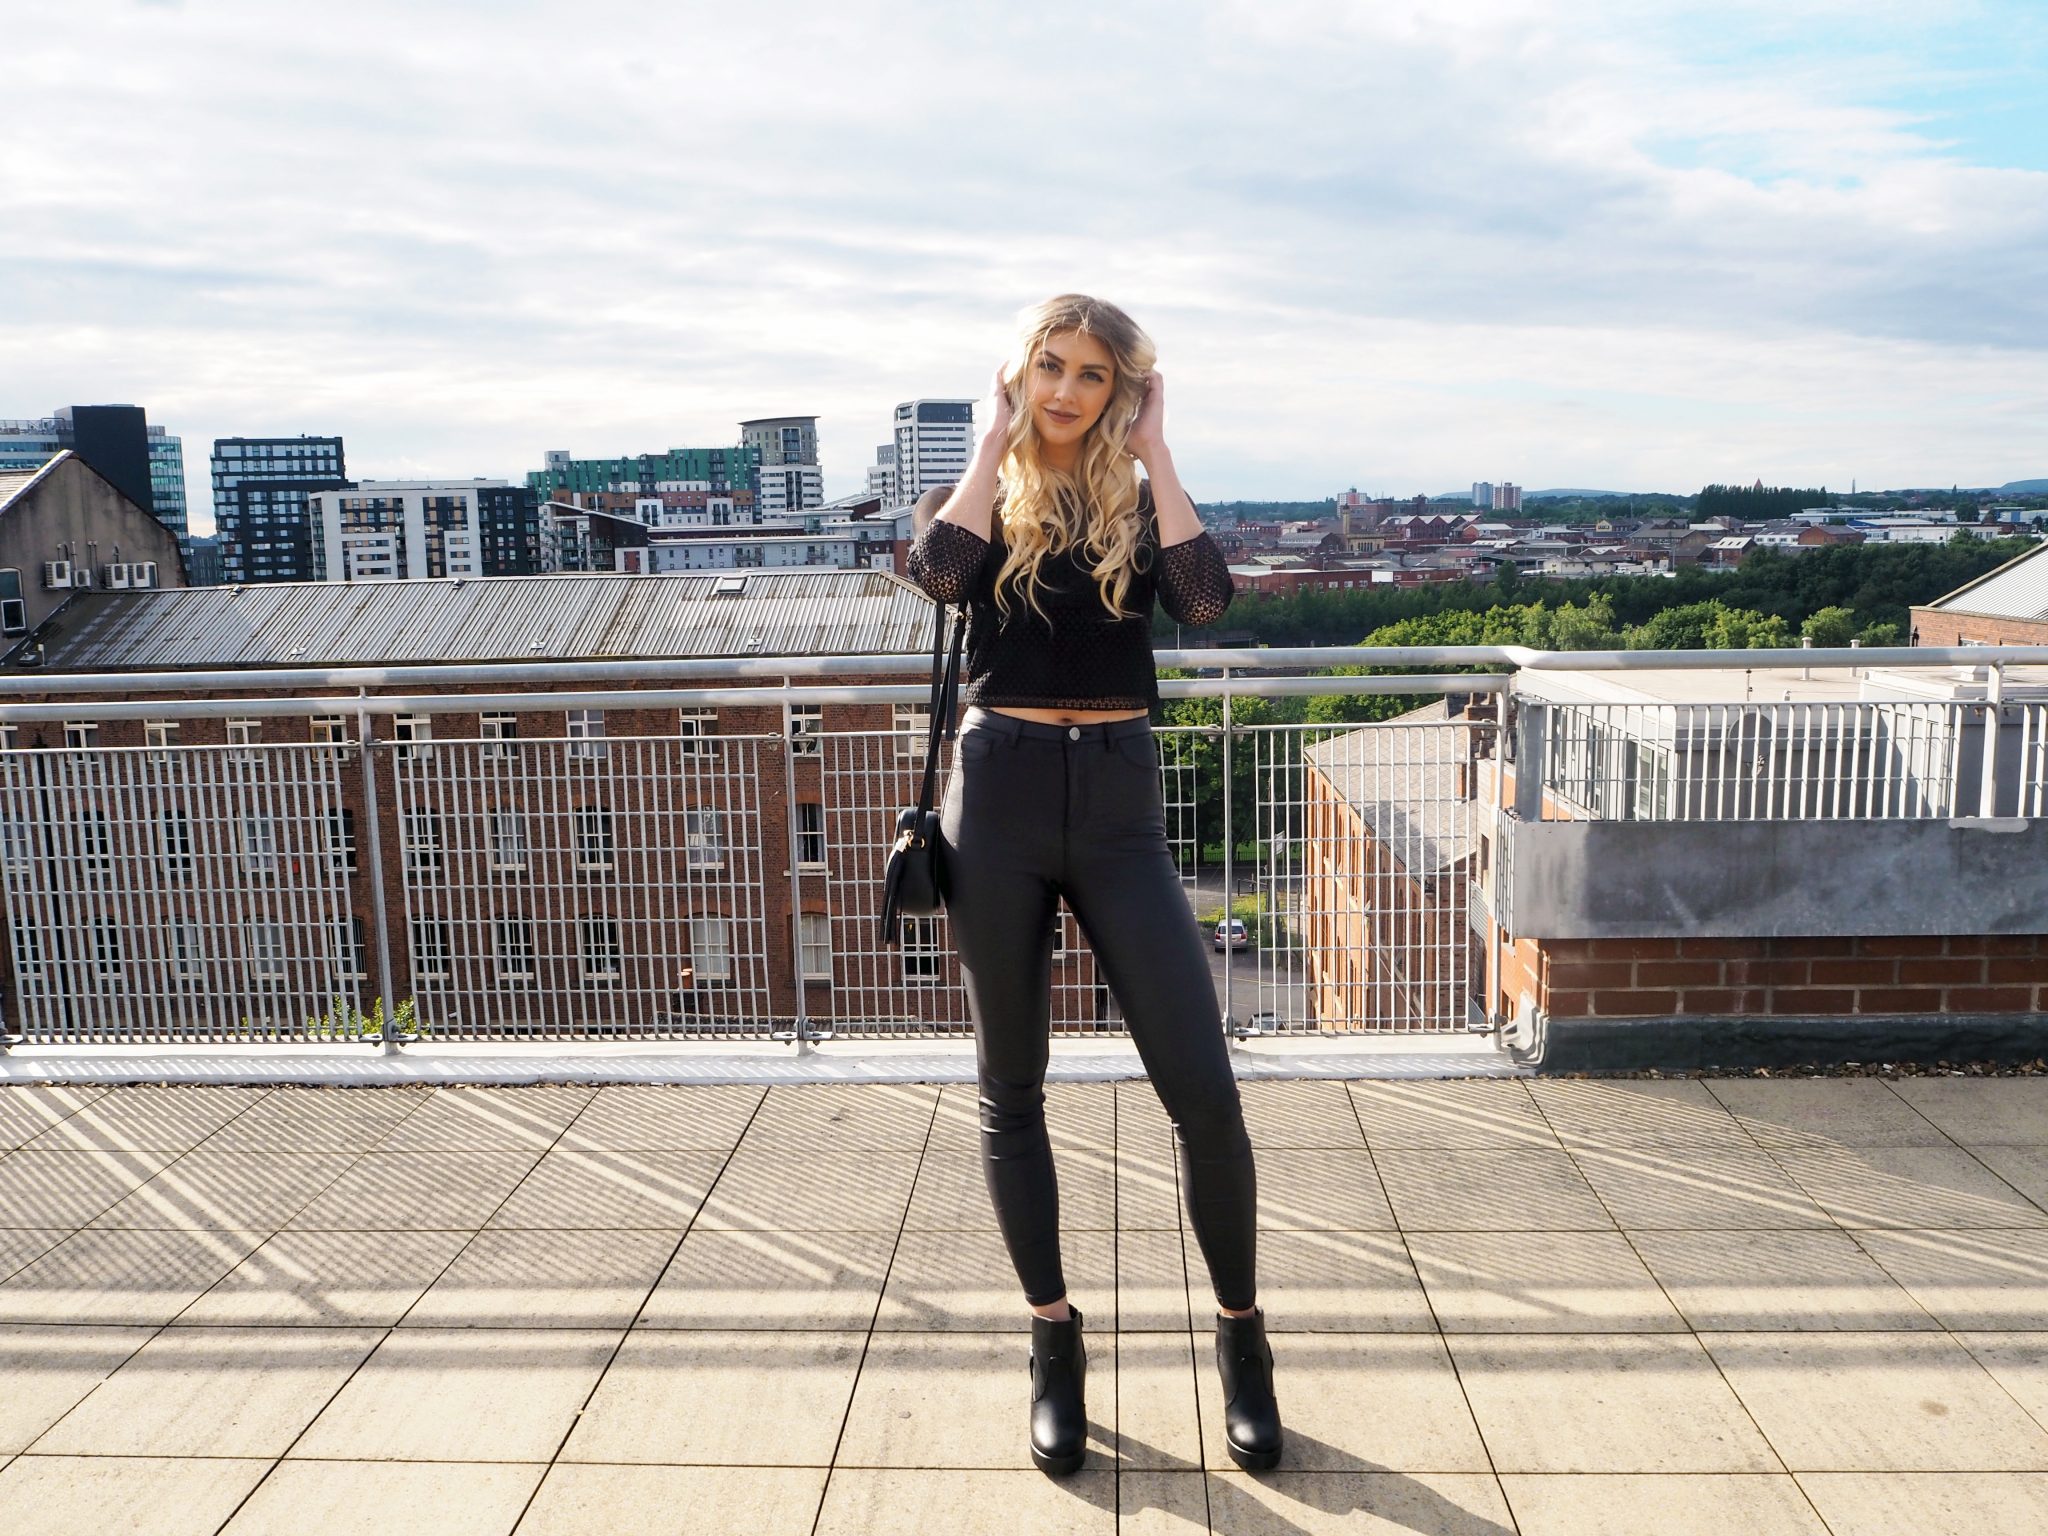 Laura Kate Lucas - Manchester Fashion, Fitness and Lifestyle Blogger | Outfit Post - Black Faux Leather Jeans, Heeled Biker Boots and Lace Crop Top